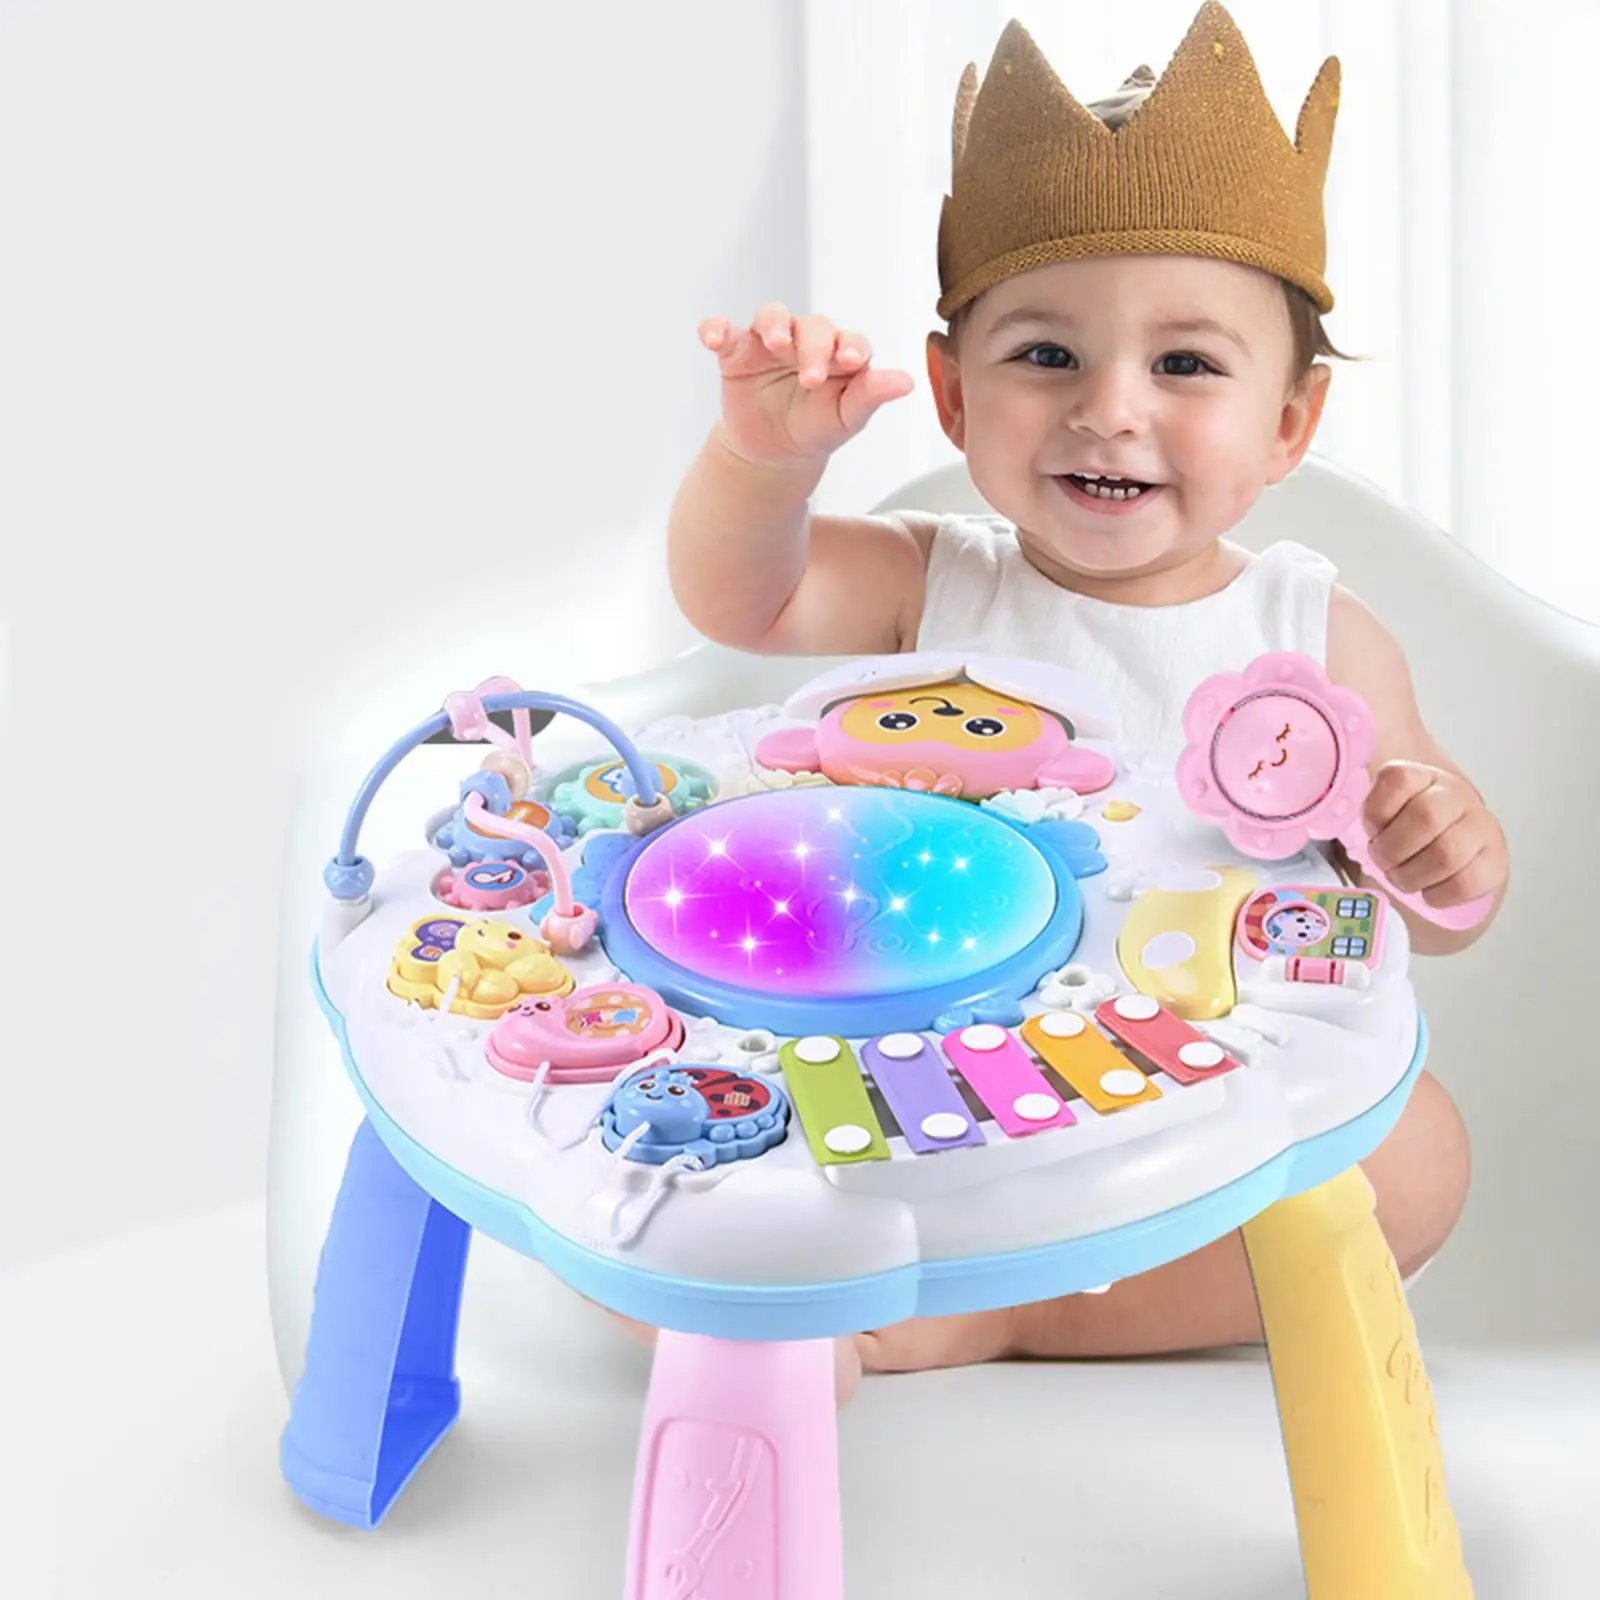 Baby Musical Montessori Toys Piano Keyboard Drum Set  Learning Educational Developmental  for Toddlers  Infant Toys